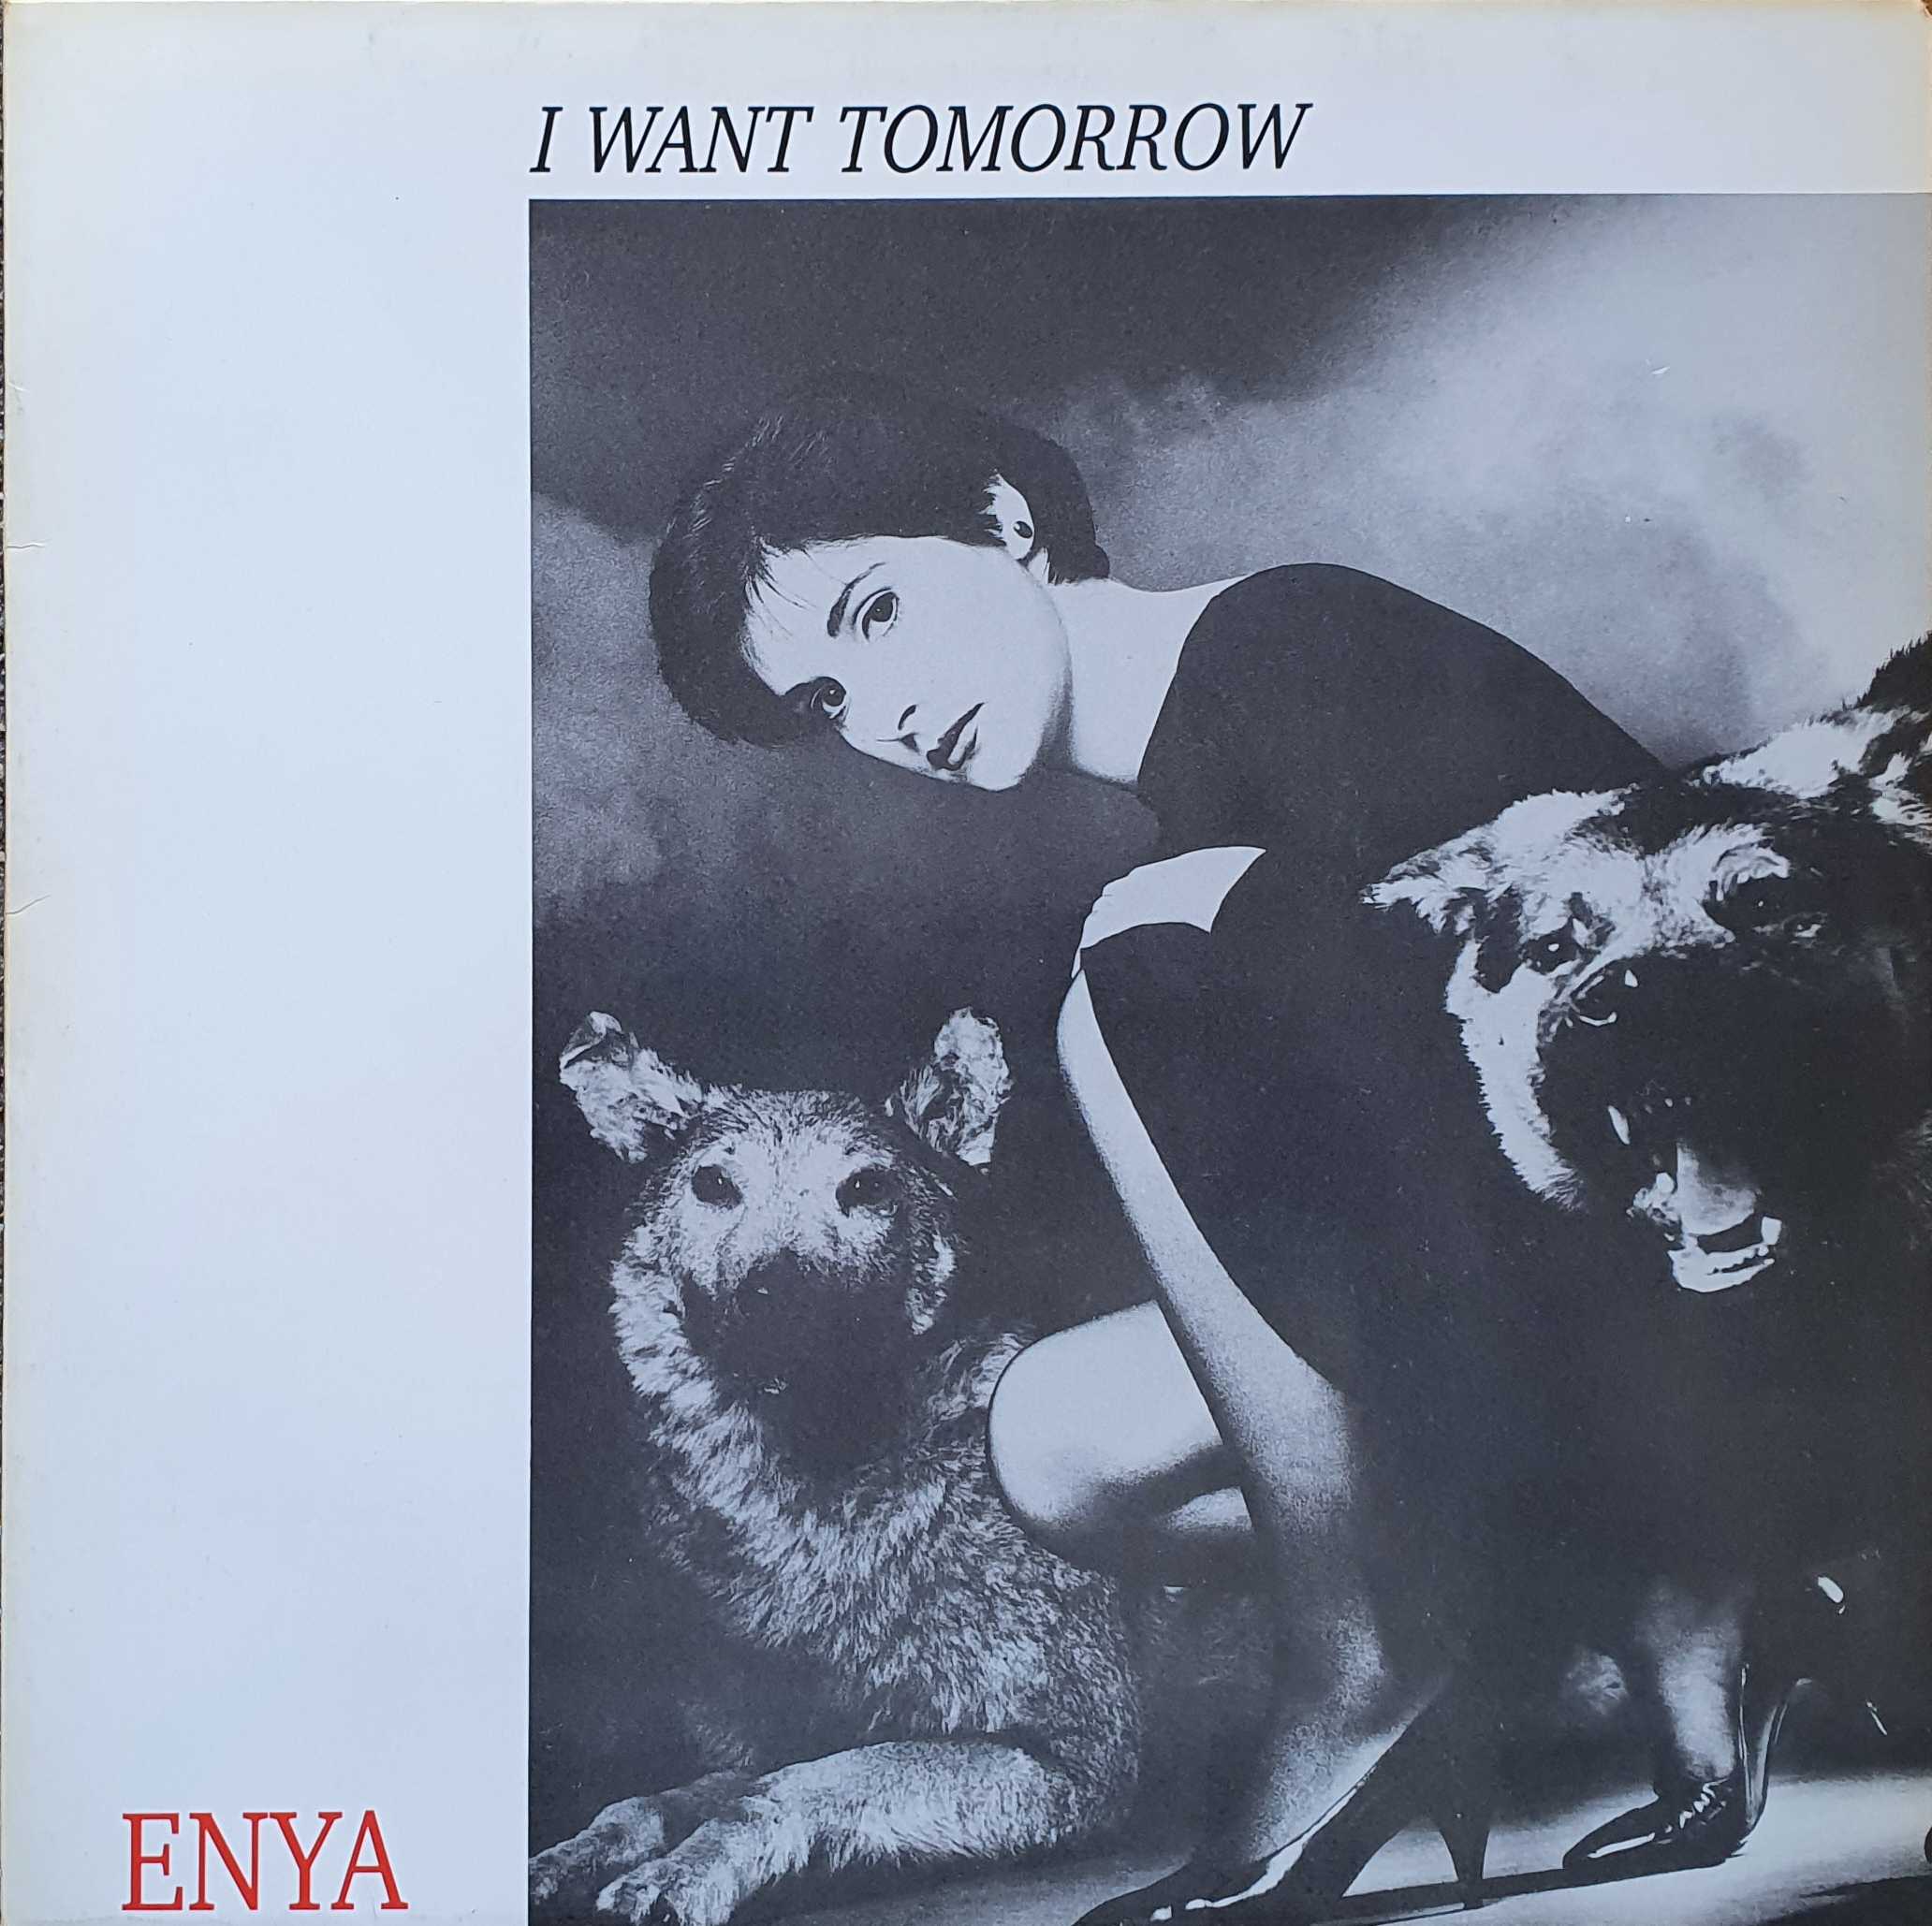 Picture of I want tomorrow (The Celts) by artist Enya / Roma Ryan from the BBC 12inches - Records and Tapes library